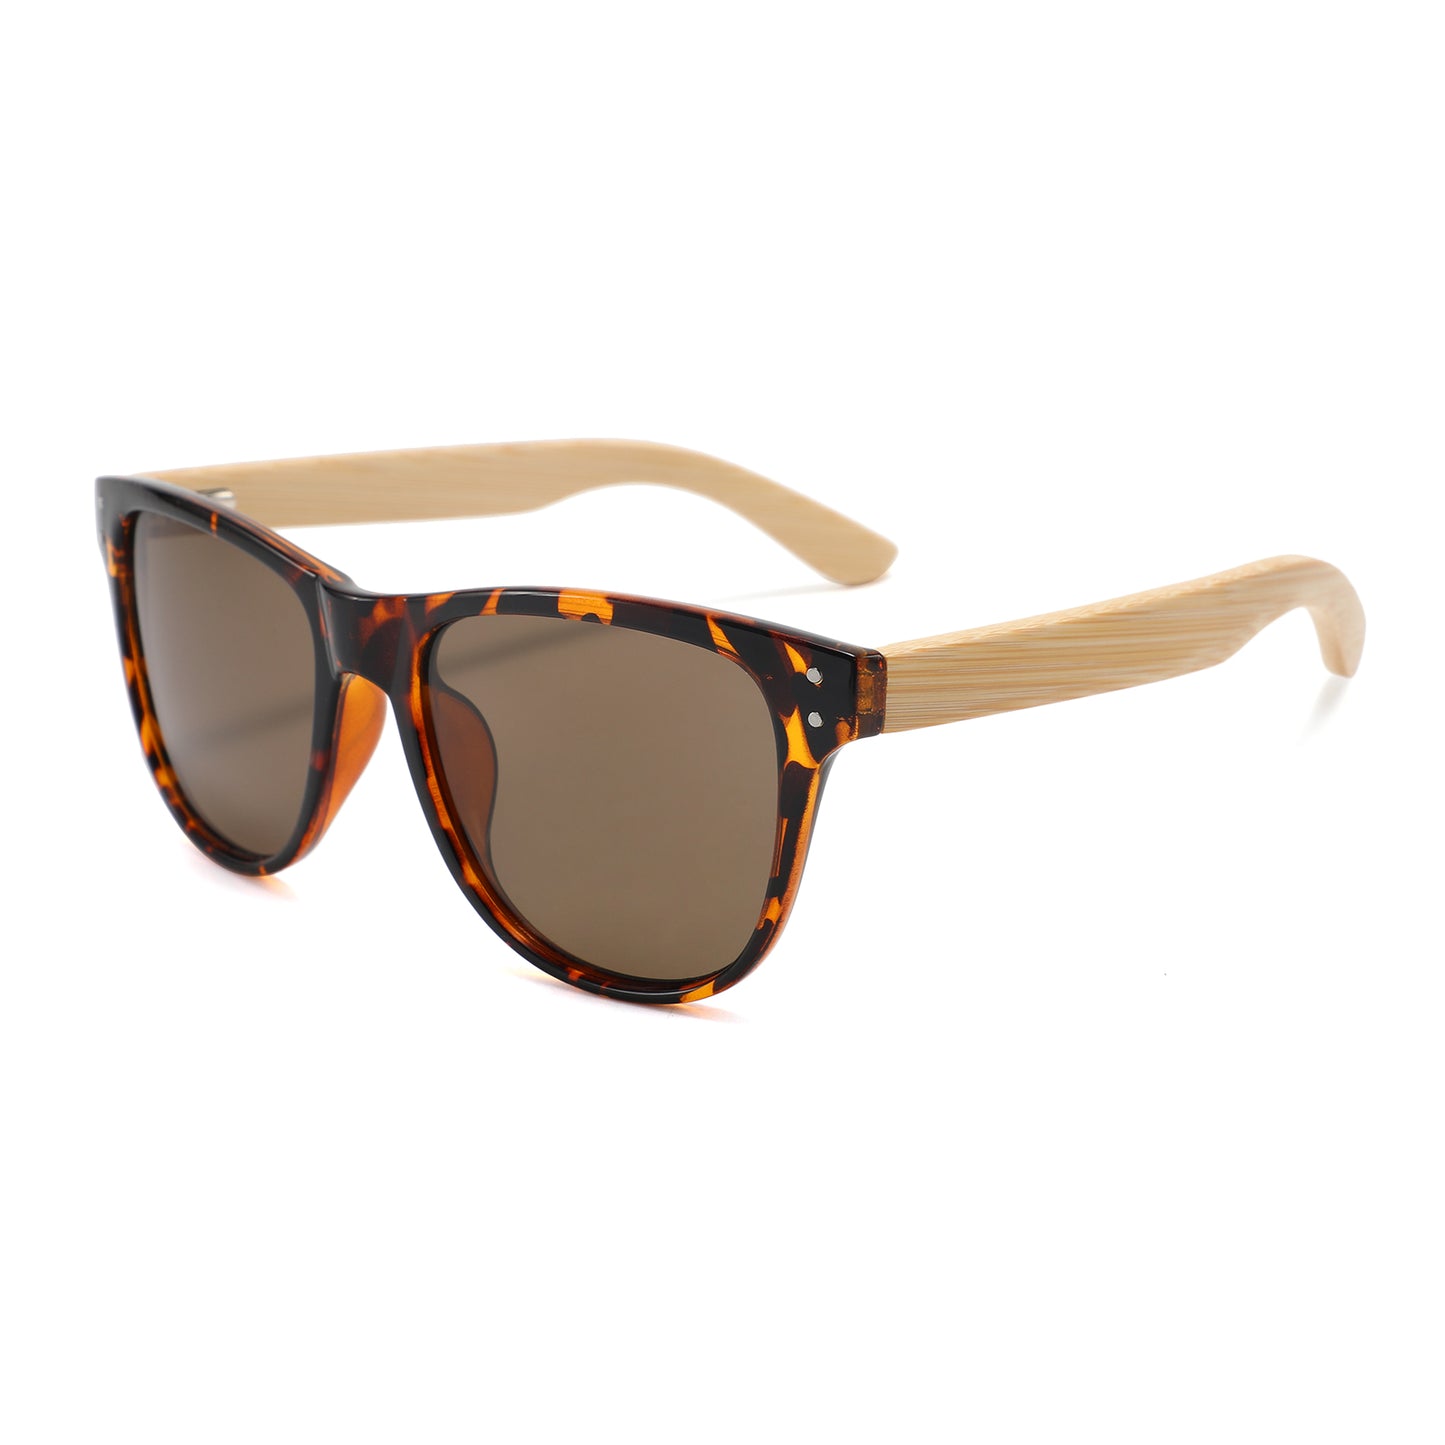 LEXI TS BROWN Ladies Sunglasses Polarised Lens Wooden Arms